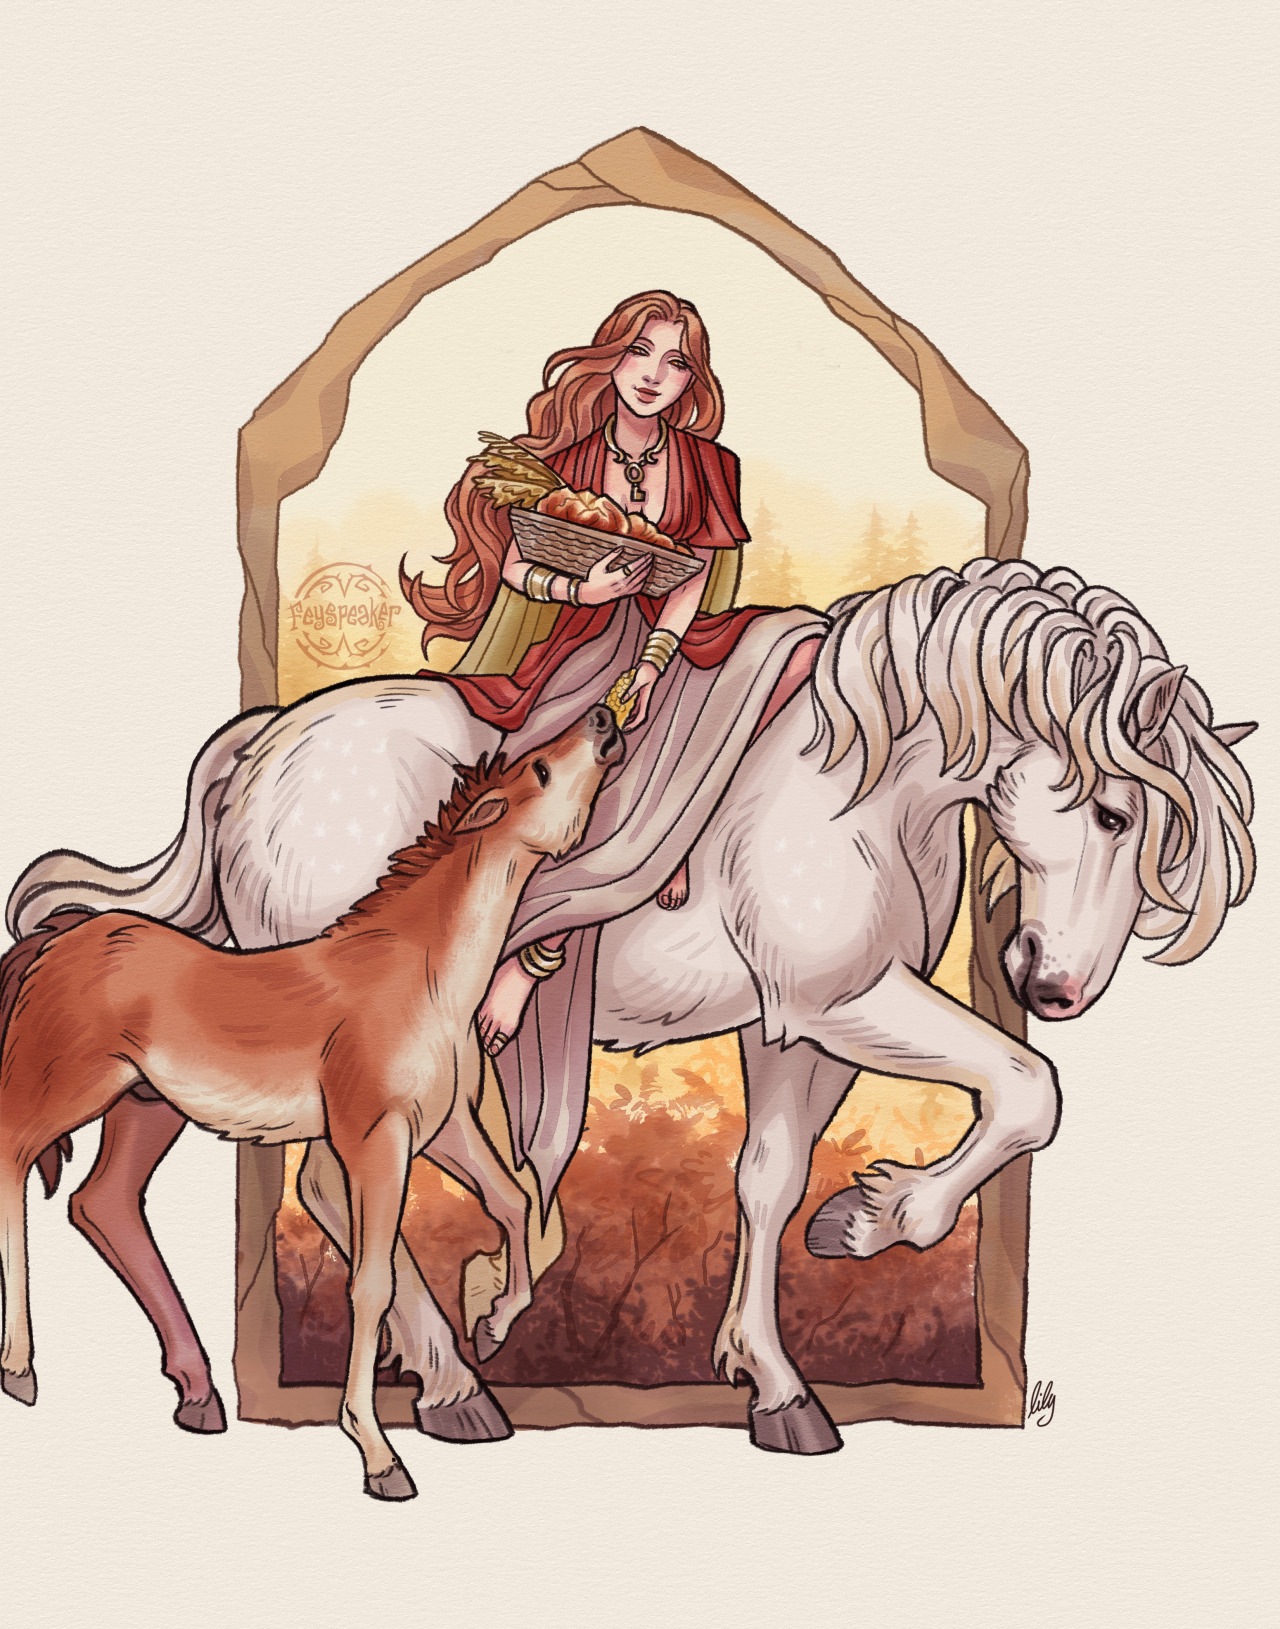 There is a white backdrop and an arched doorway into the forest. Goddess Epona is riding a white horse with a cornucopia in her hand while feeding a brown horse beside her.